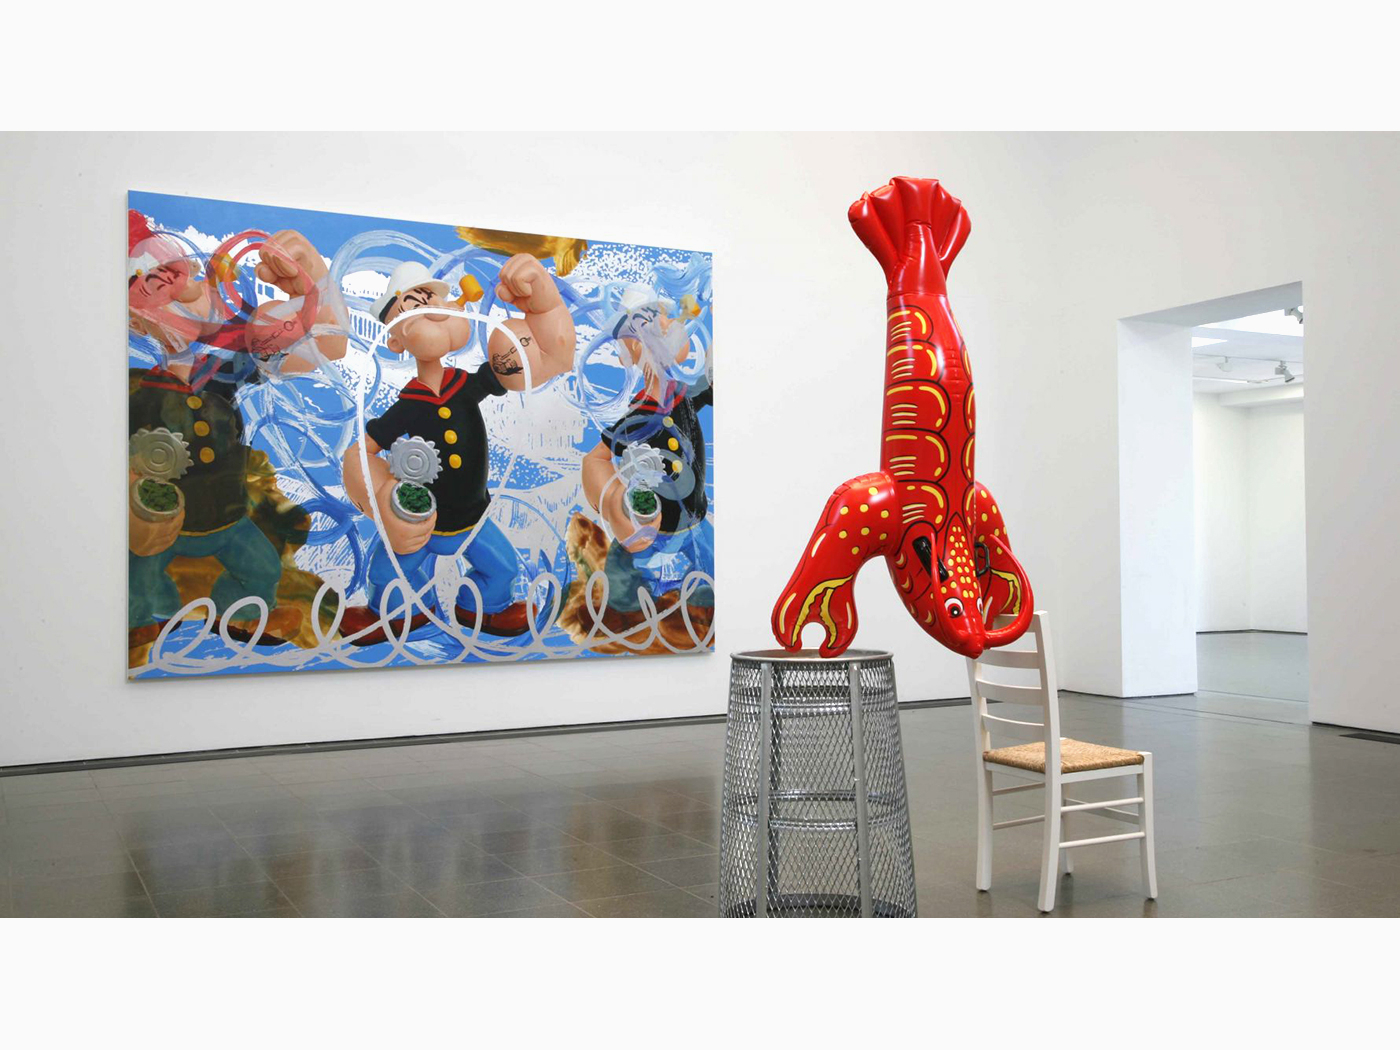 Koons poses here with one of his playful 'Balloon Dog' sculptures which are among the most iconic works of contemporary art in the 21st Century. In 2013, one of his 10-foot-tall Balloon Dog's was purchased for $58.4 million at Christie’s, setting a new record for the most expensive work ever sold at auction by a living artist.